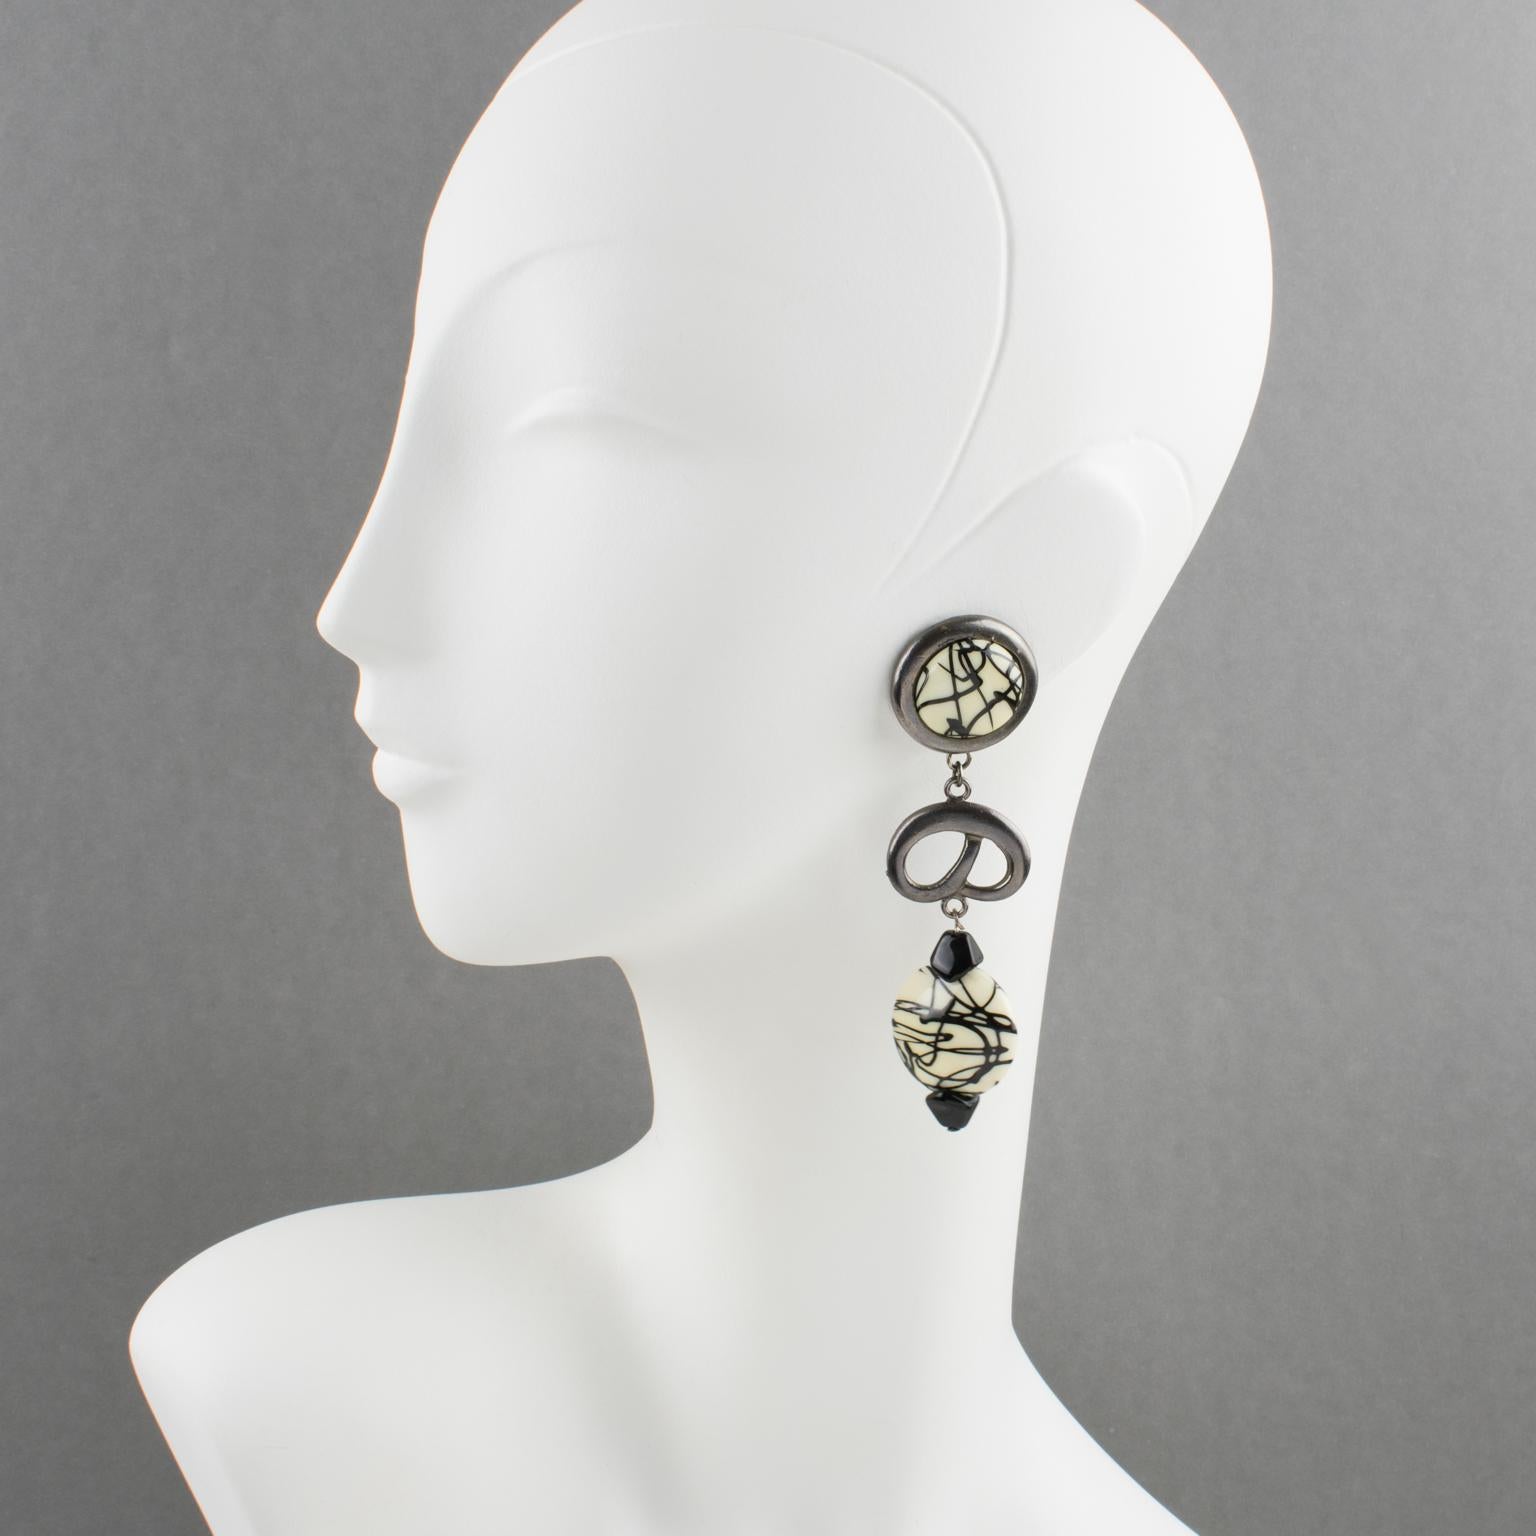 These stunning Paco Rabanne Paris clip-on earrings have a futuristic flair. They boast a long dangling-drop shape with metal in gunmetal color, all carved and see-thru, topped with resin cabochon and beads in black and white colors. Each piece is